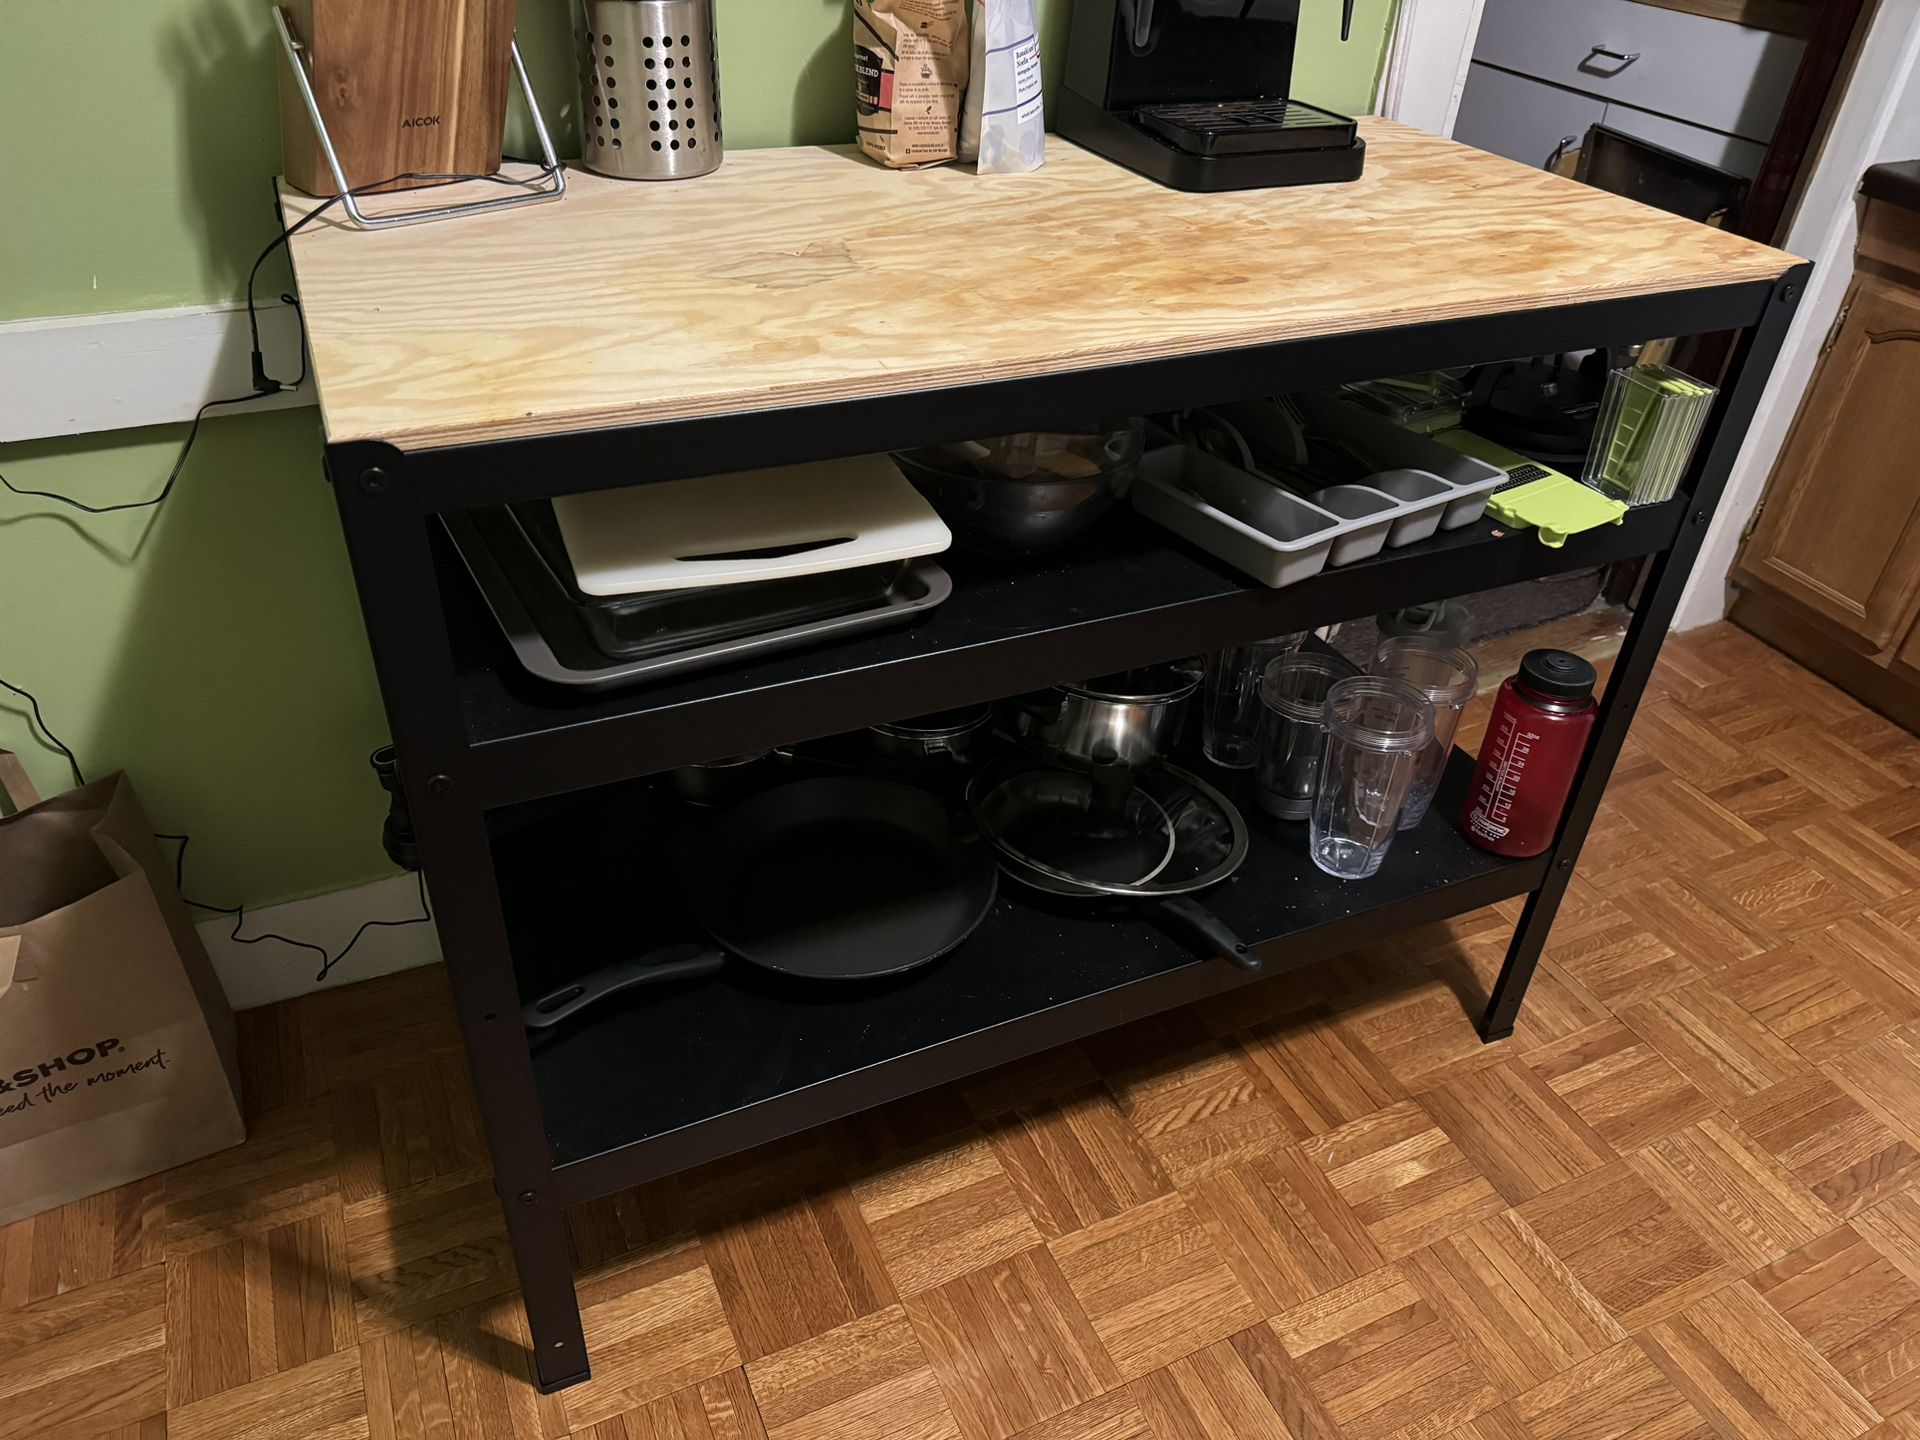 Kitchen Counter Table / Workbench 